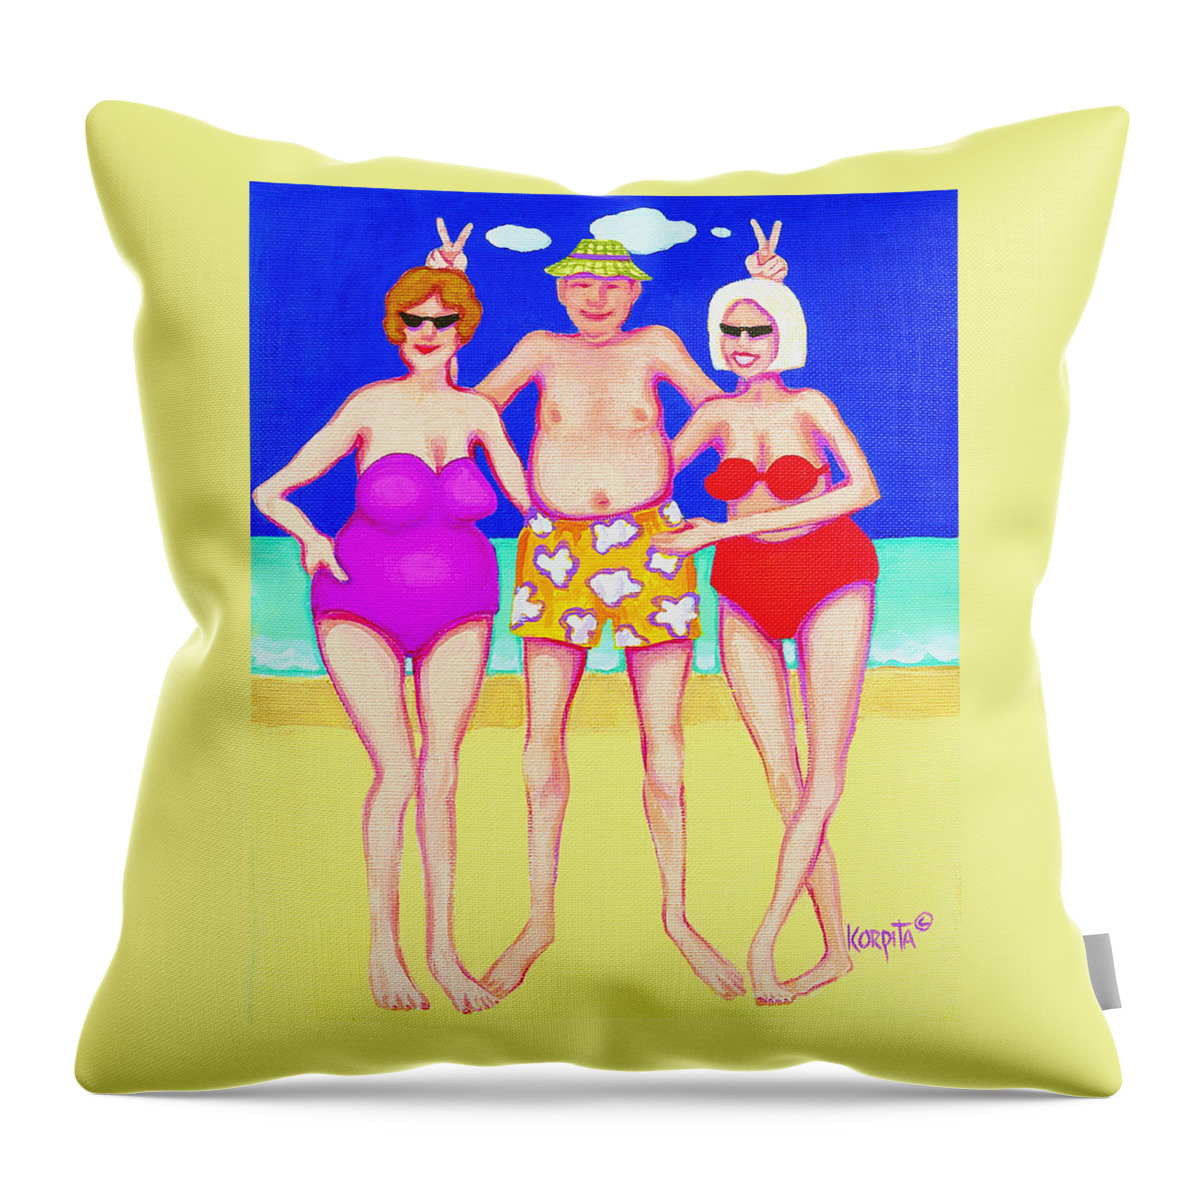 Funny Beach Throw Pillow featuring the painting Funny Beach Women Man by Rebecca Korpita